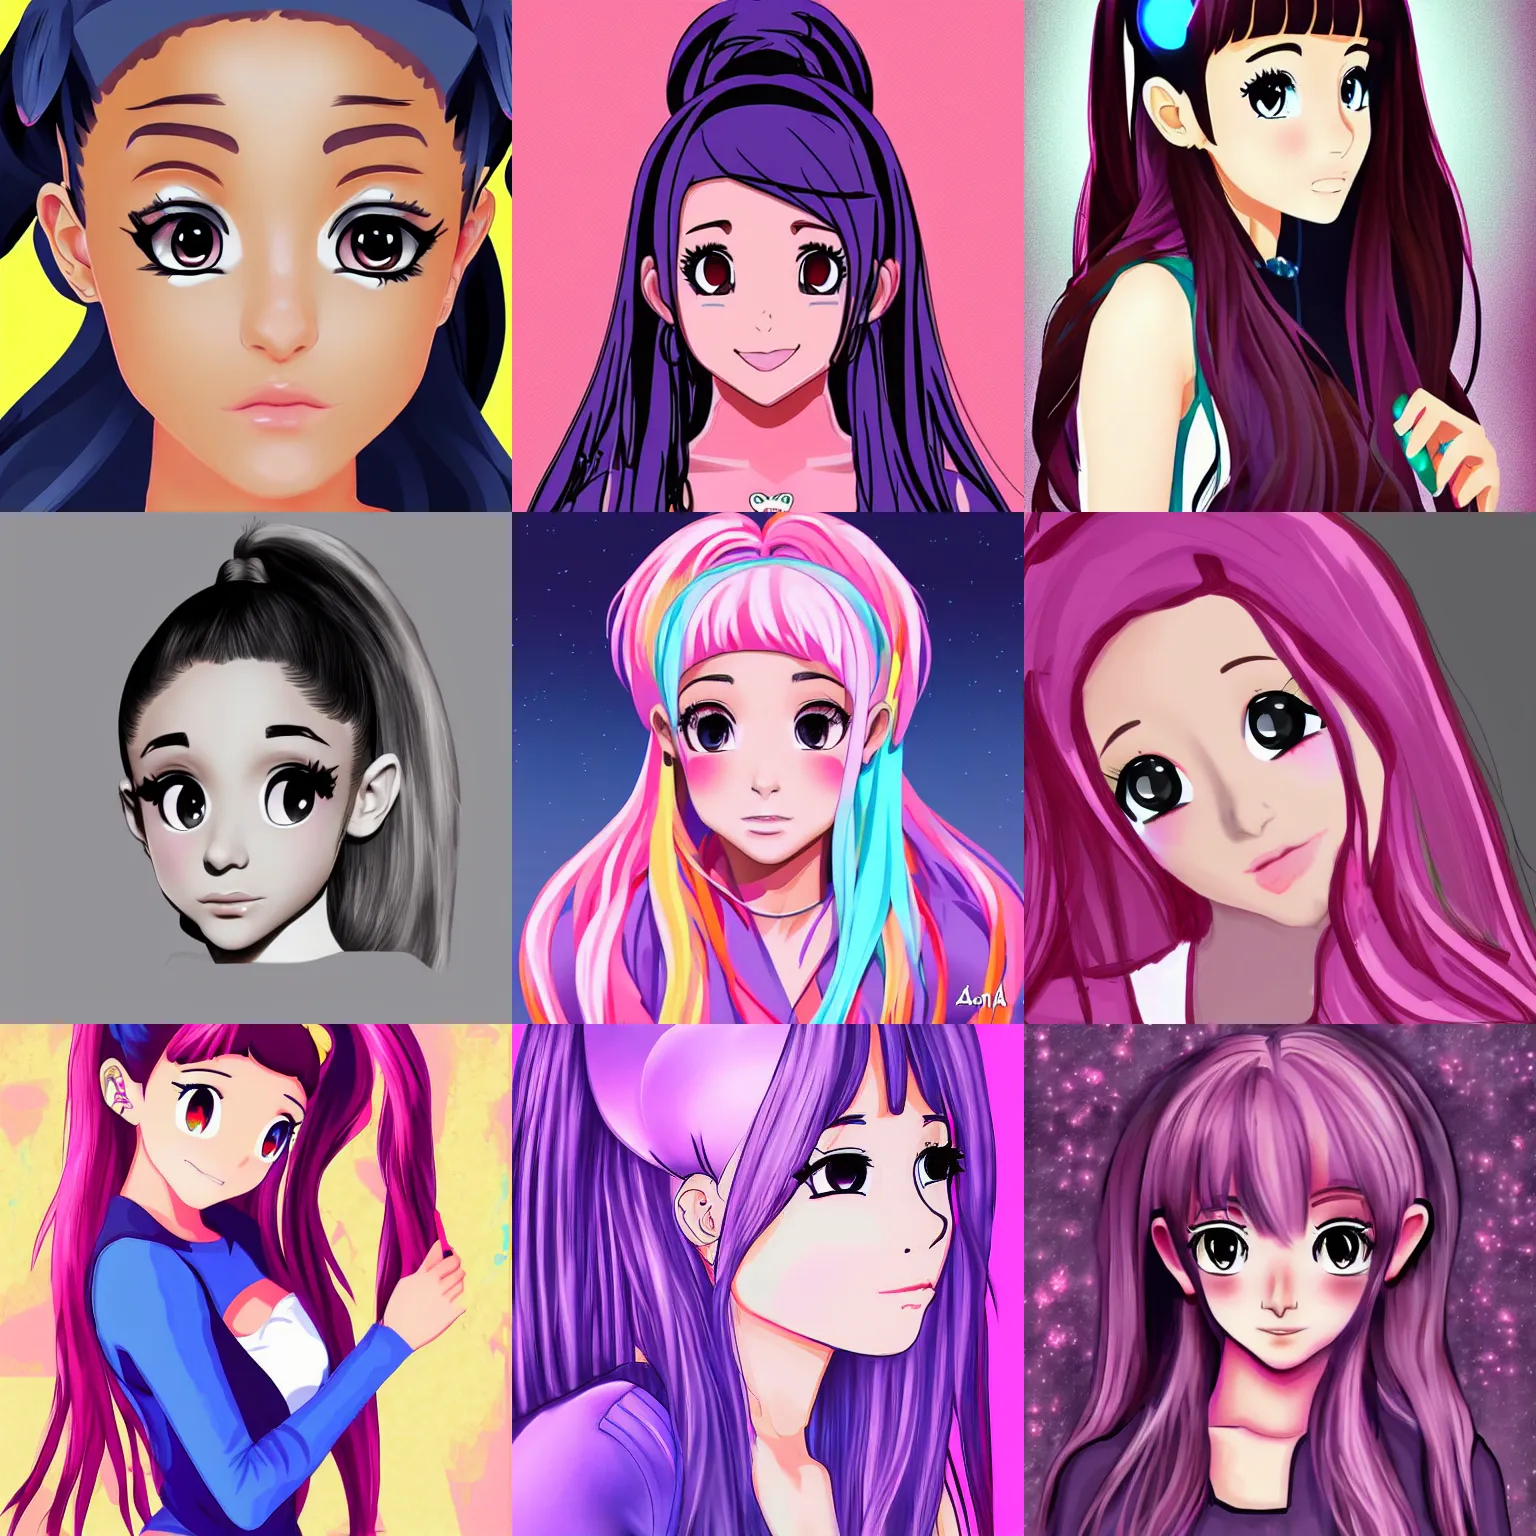 Does Ariana Grande Like Anime  What Is Her Favorite